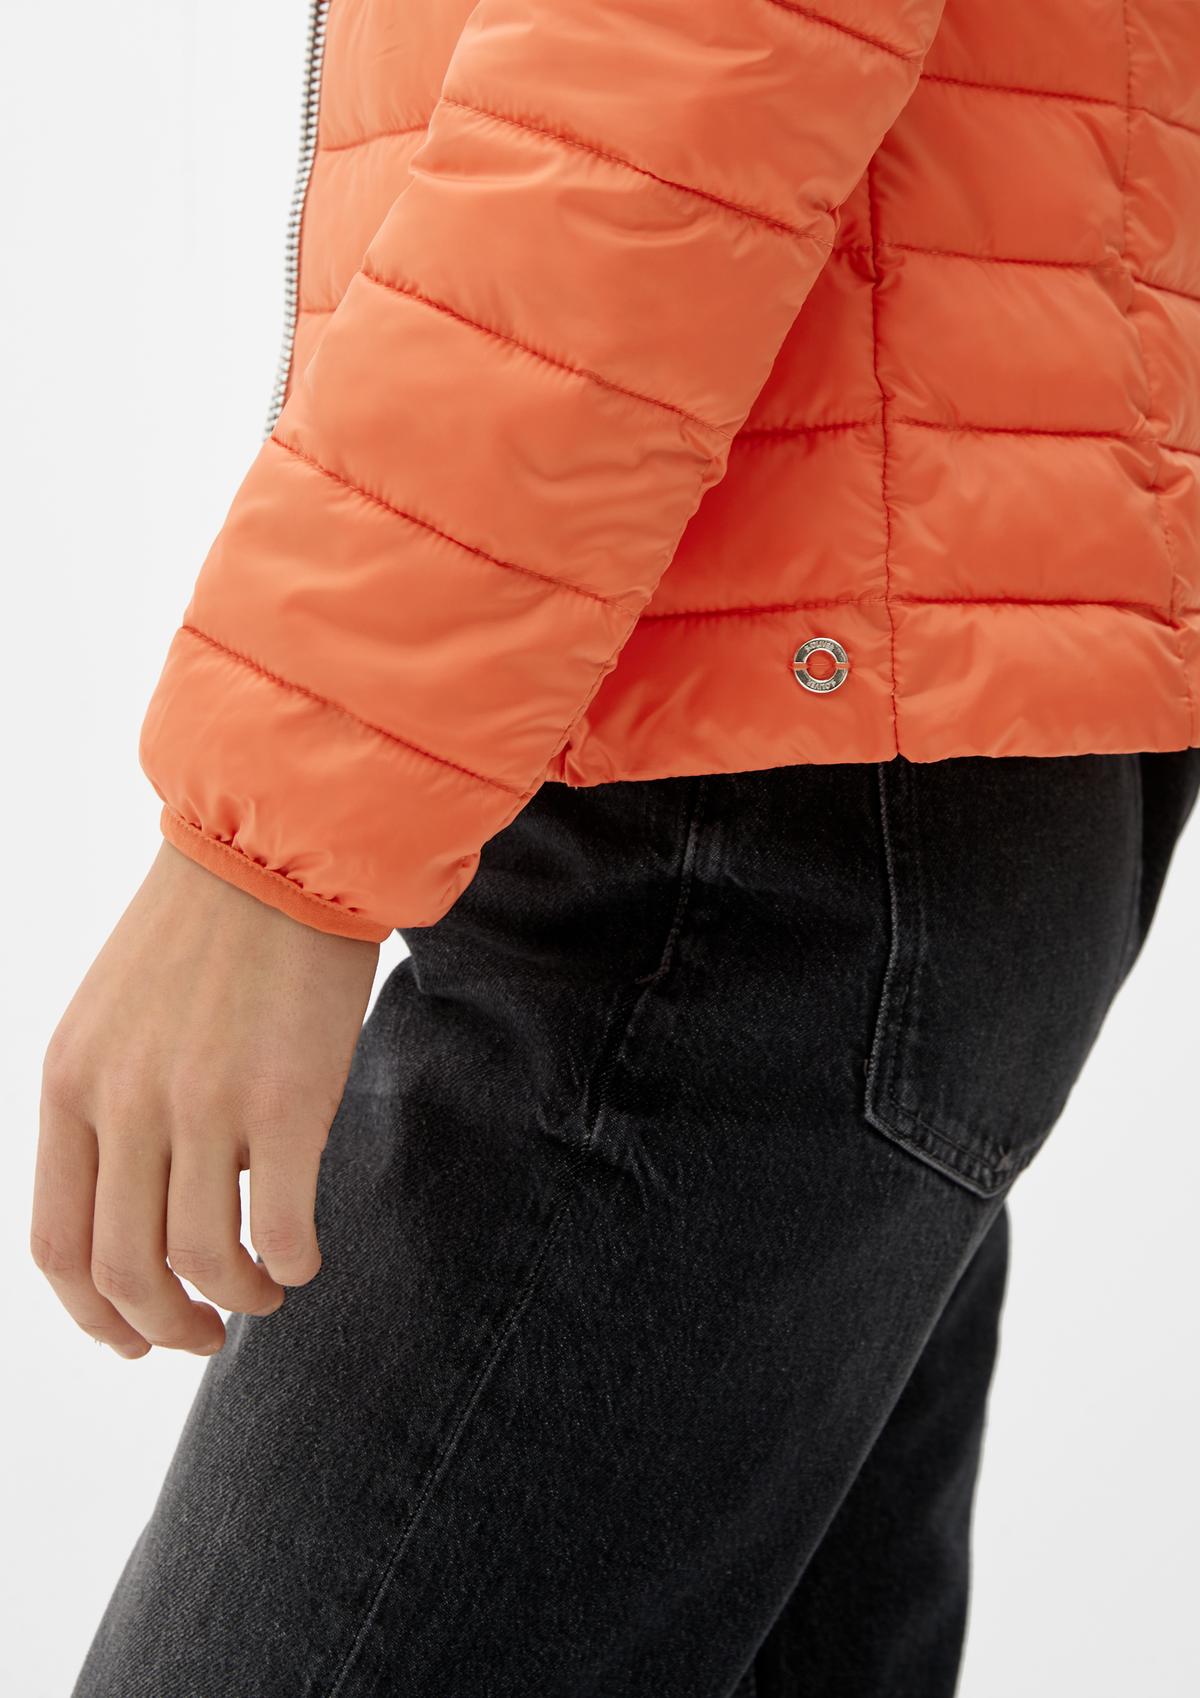 s.Oliver Outerwear jas met stiksel